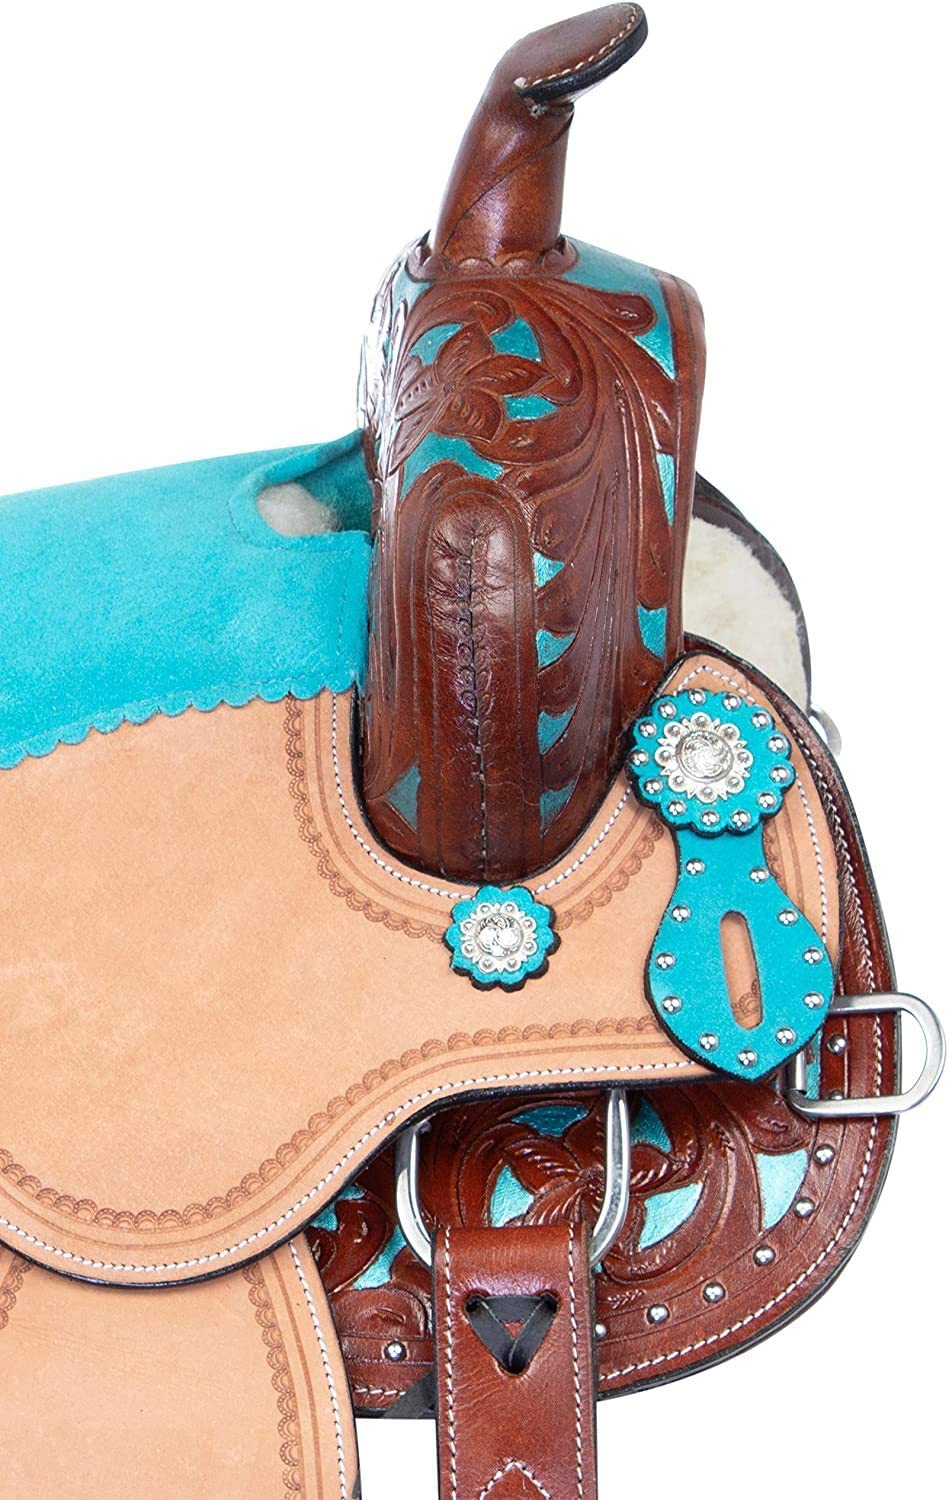 Blue Lake Pony Crystal Youth Kids Western Beautiful Pleasure Trail Premium Leather Pony Horse Saddle Free TACK Included-Color Brown & Black 